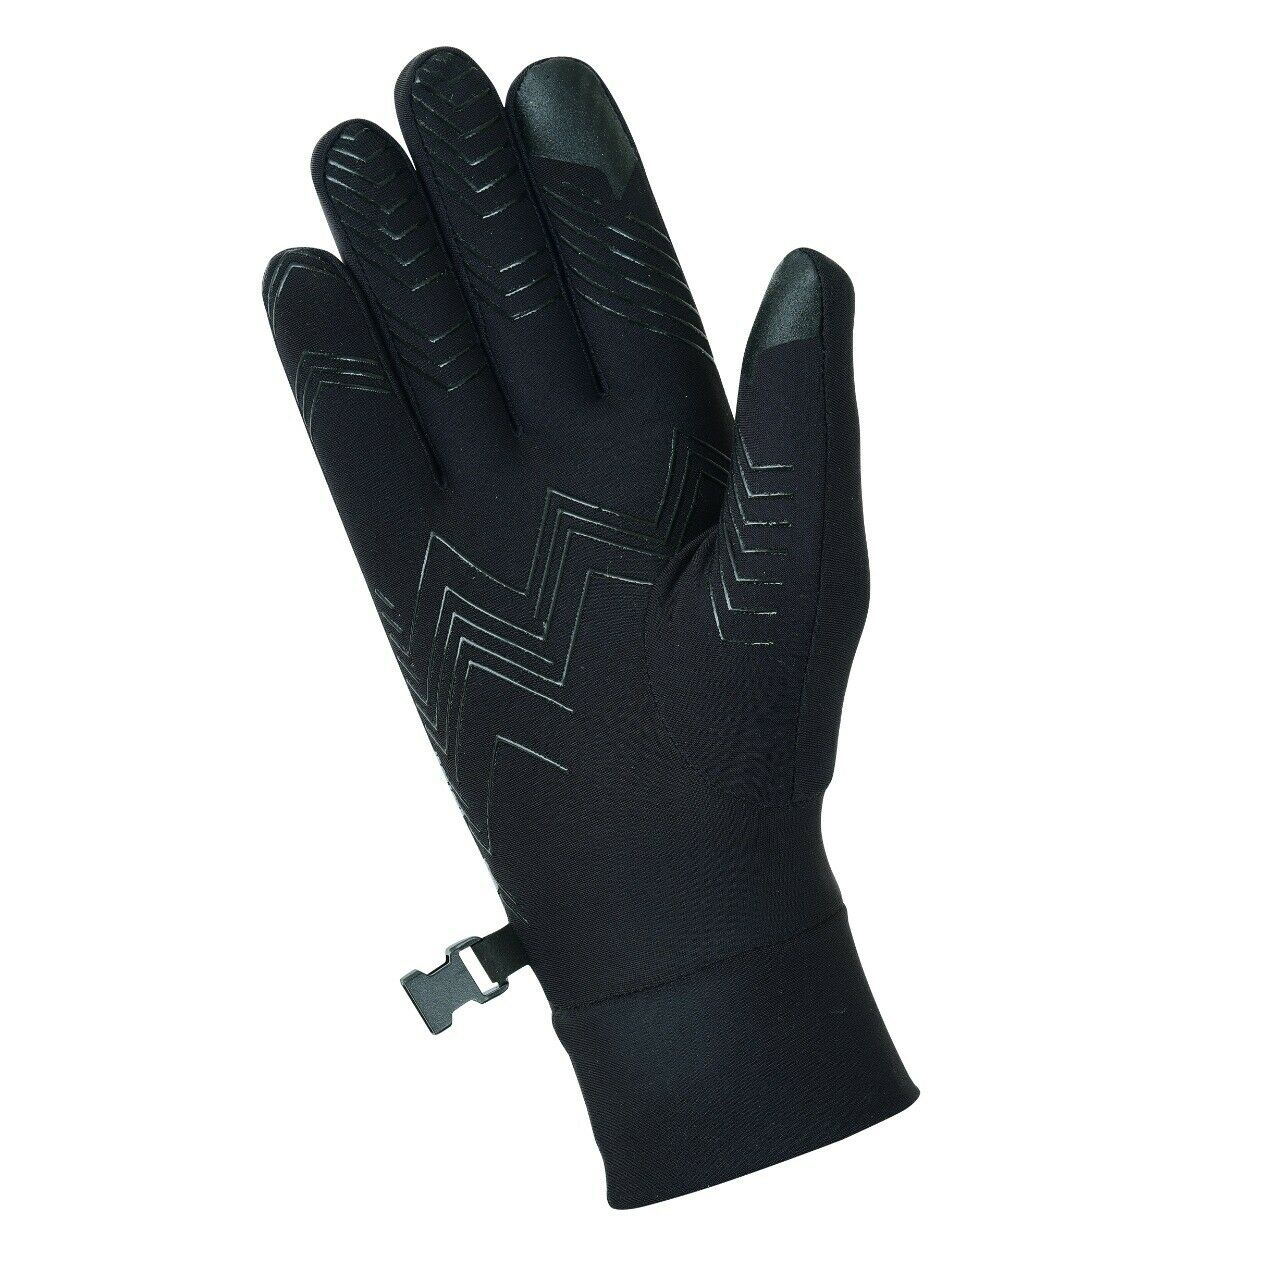 Running Gloves Light Weight Touchscreen Thermal Jogging Cycling Hiking Gloves 